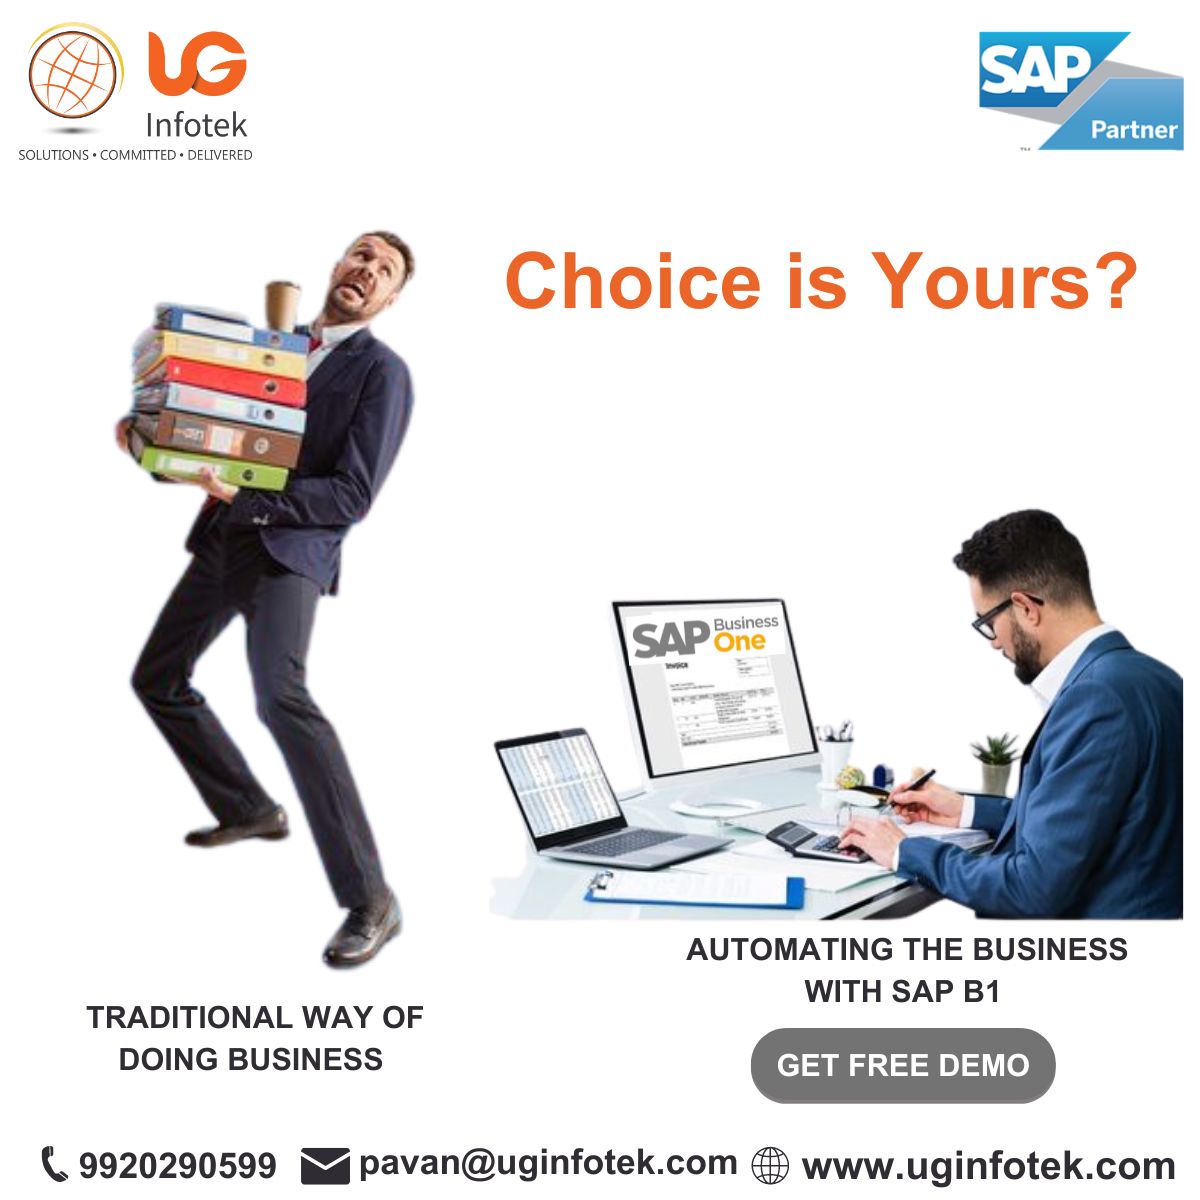 Ready to Transform Your Business? SAP B1 is the key! 🚀 With Streamlined Management and Unstoppable Growth, UG Infotek LLP helps your business reach new heights. Let's embark on this journey together! #sapbusinessone #inventorymanagement #affordableprice #uginfotekllp #sapb1 #erp